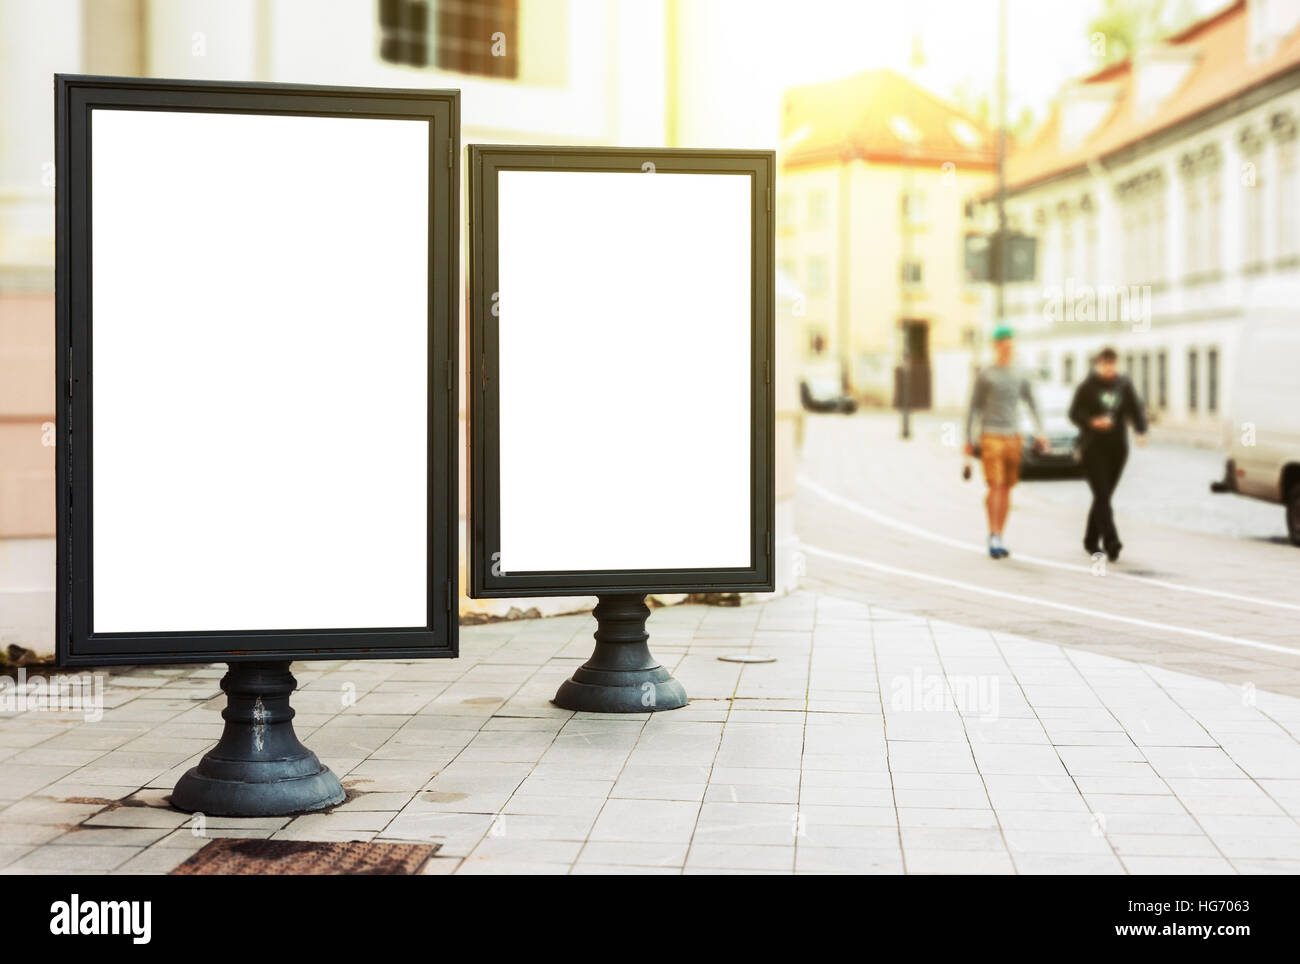 Two blank advertising billboards on the city street with pedestrians and sun glow Stock Photo